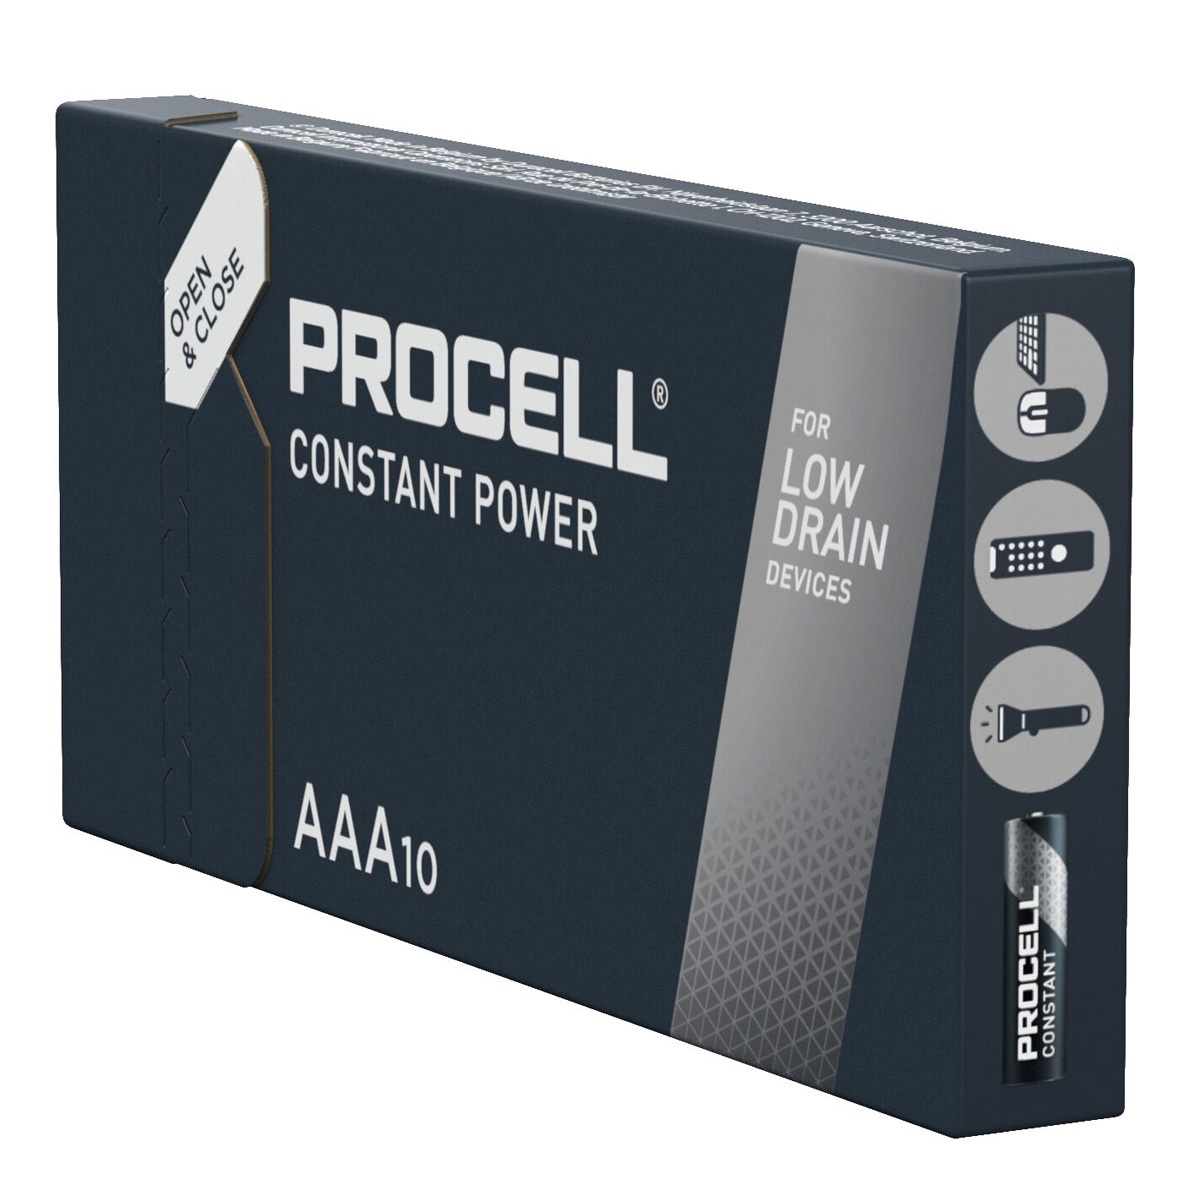 Duracell Procell Constant Alkaline LR3 Micro AAA Batterie MN 2400 1,5V 10 Stk. (Box)